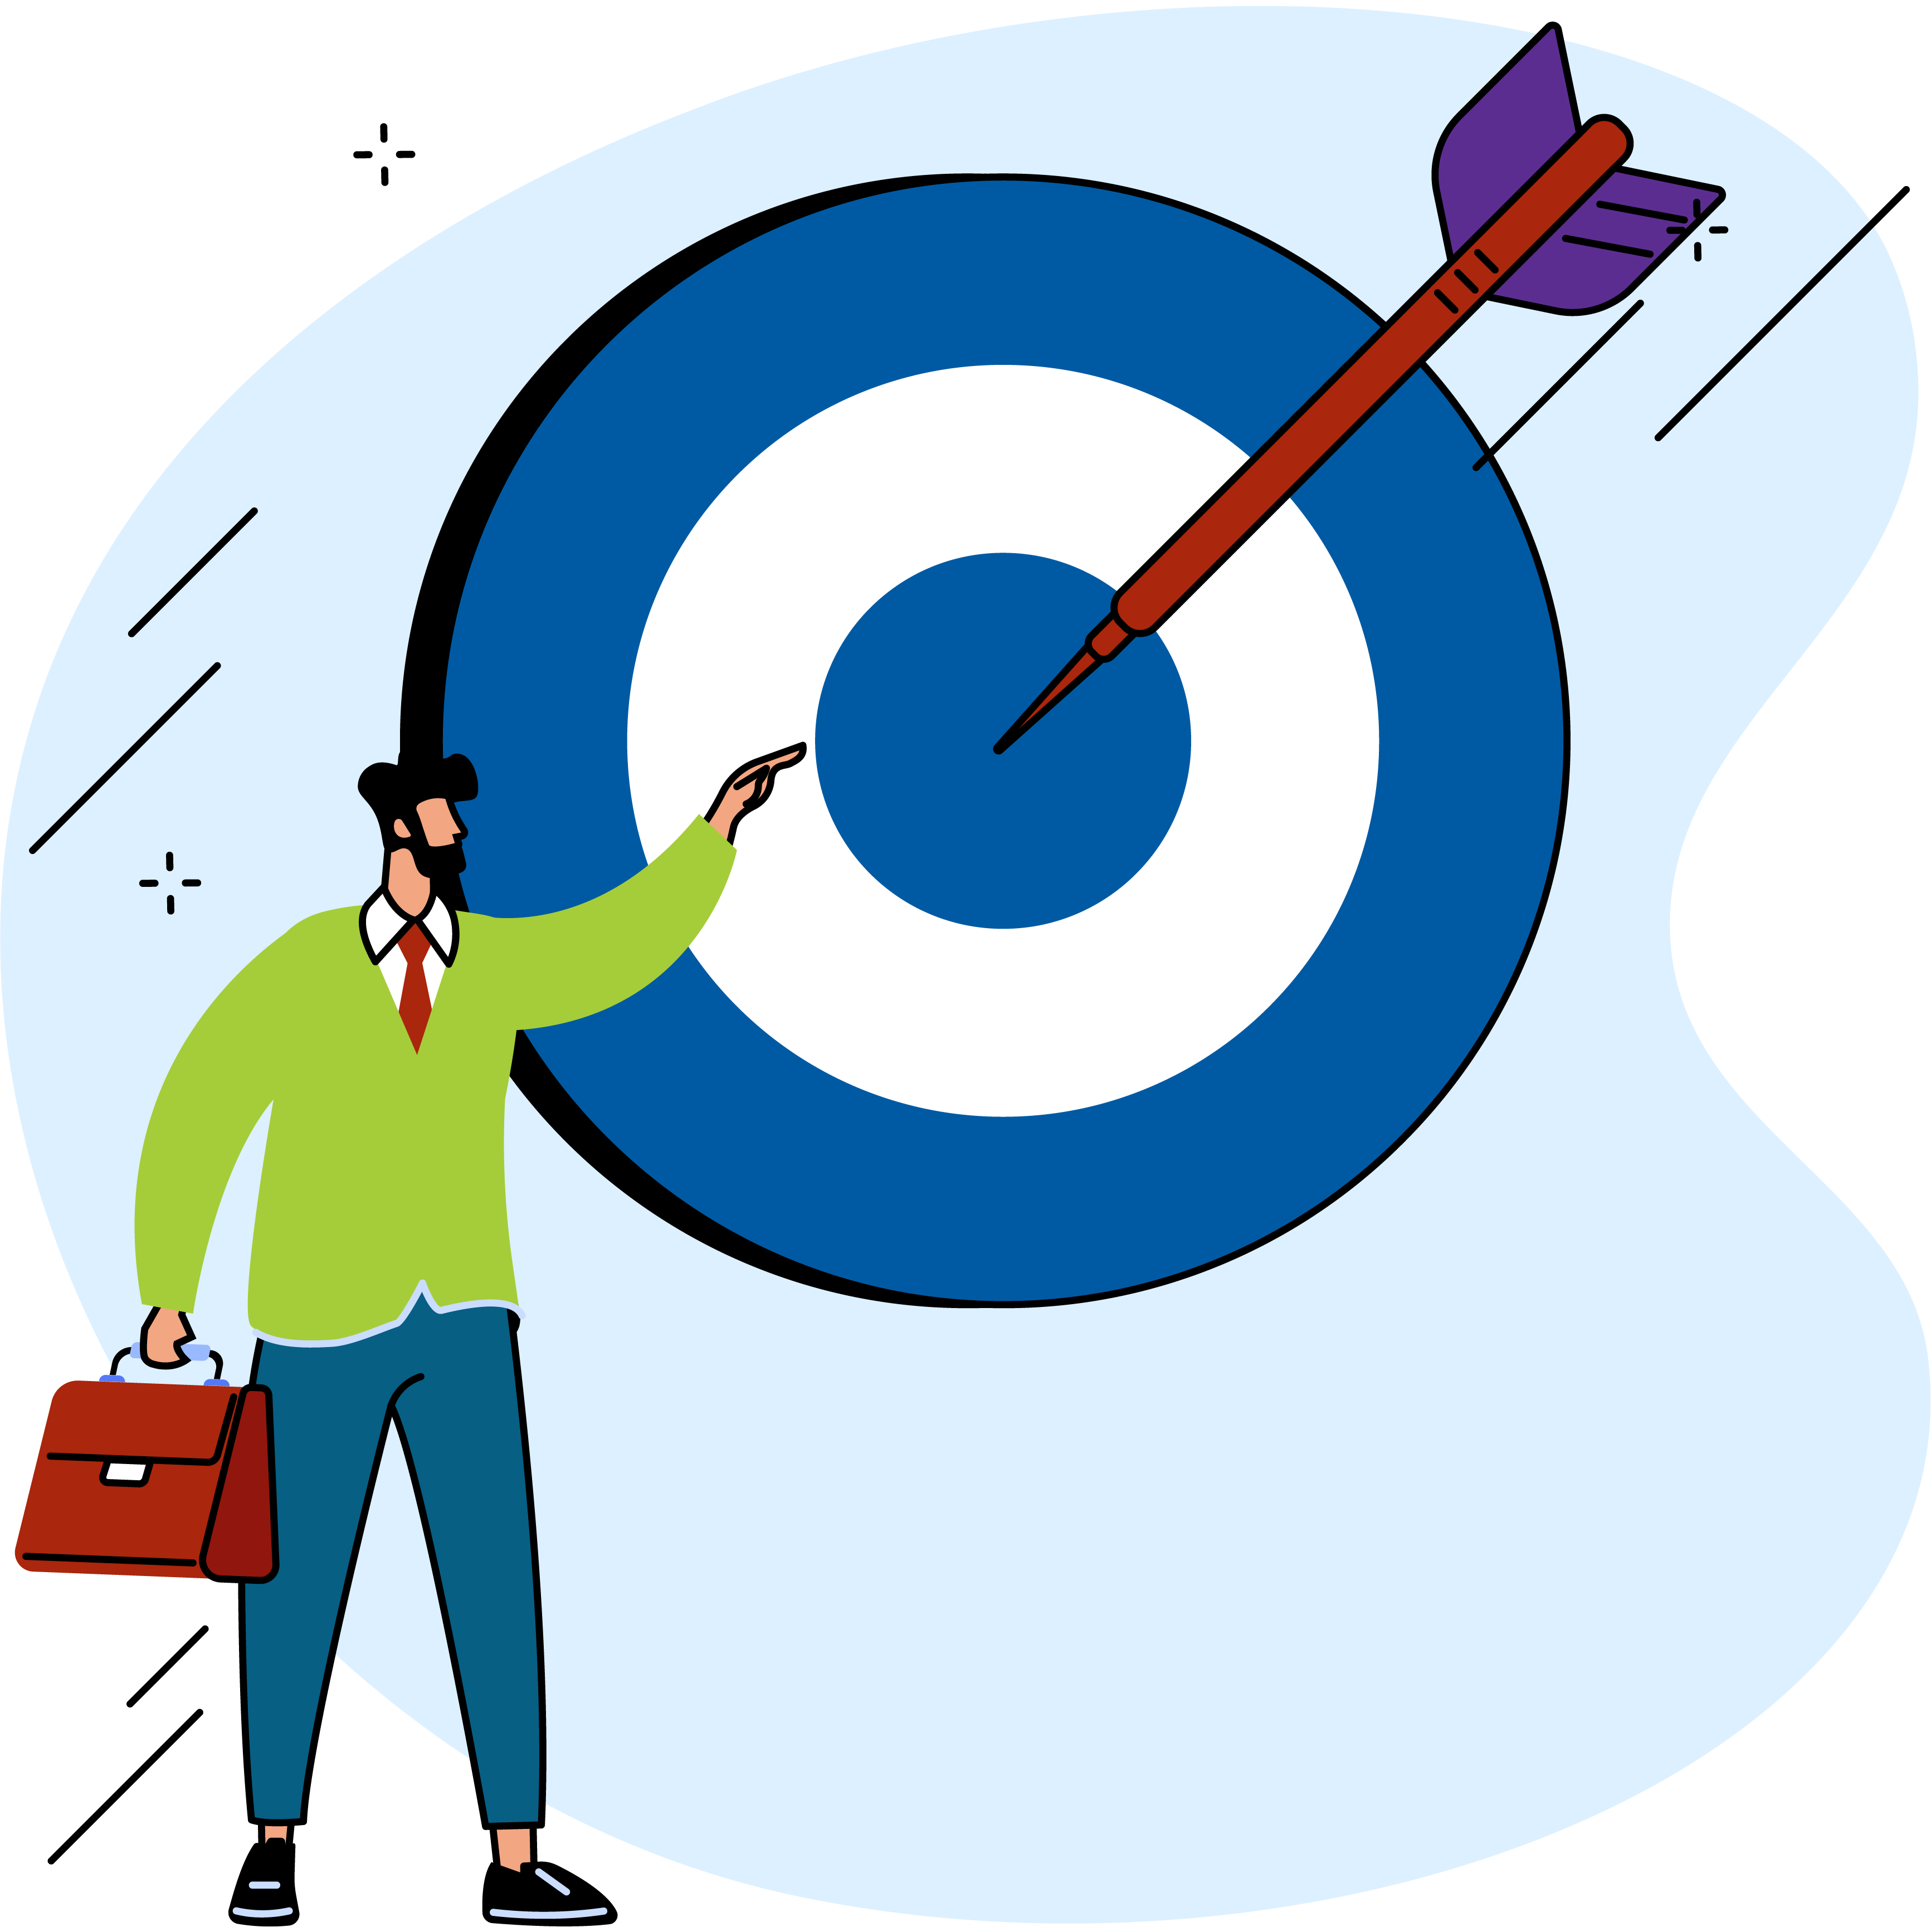 Illustration of a person with a briefcase standing next to a target board with an arrow.